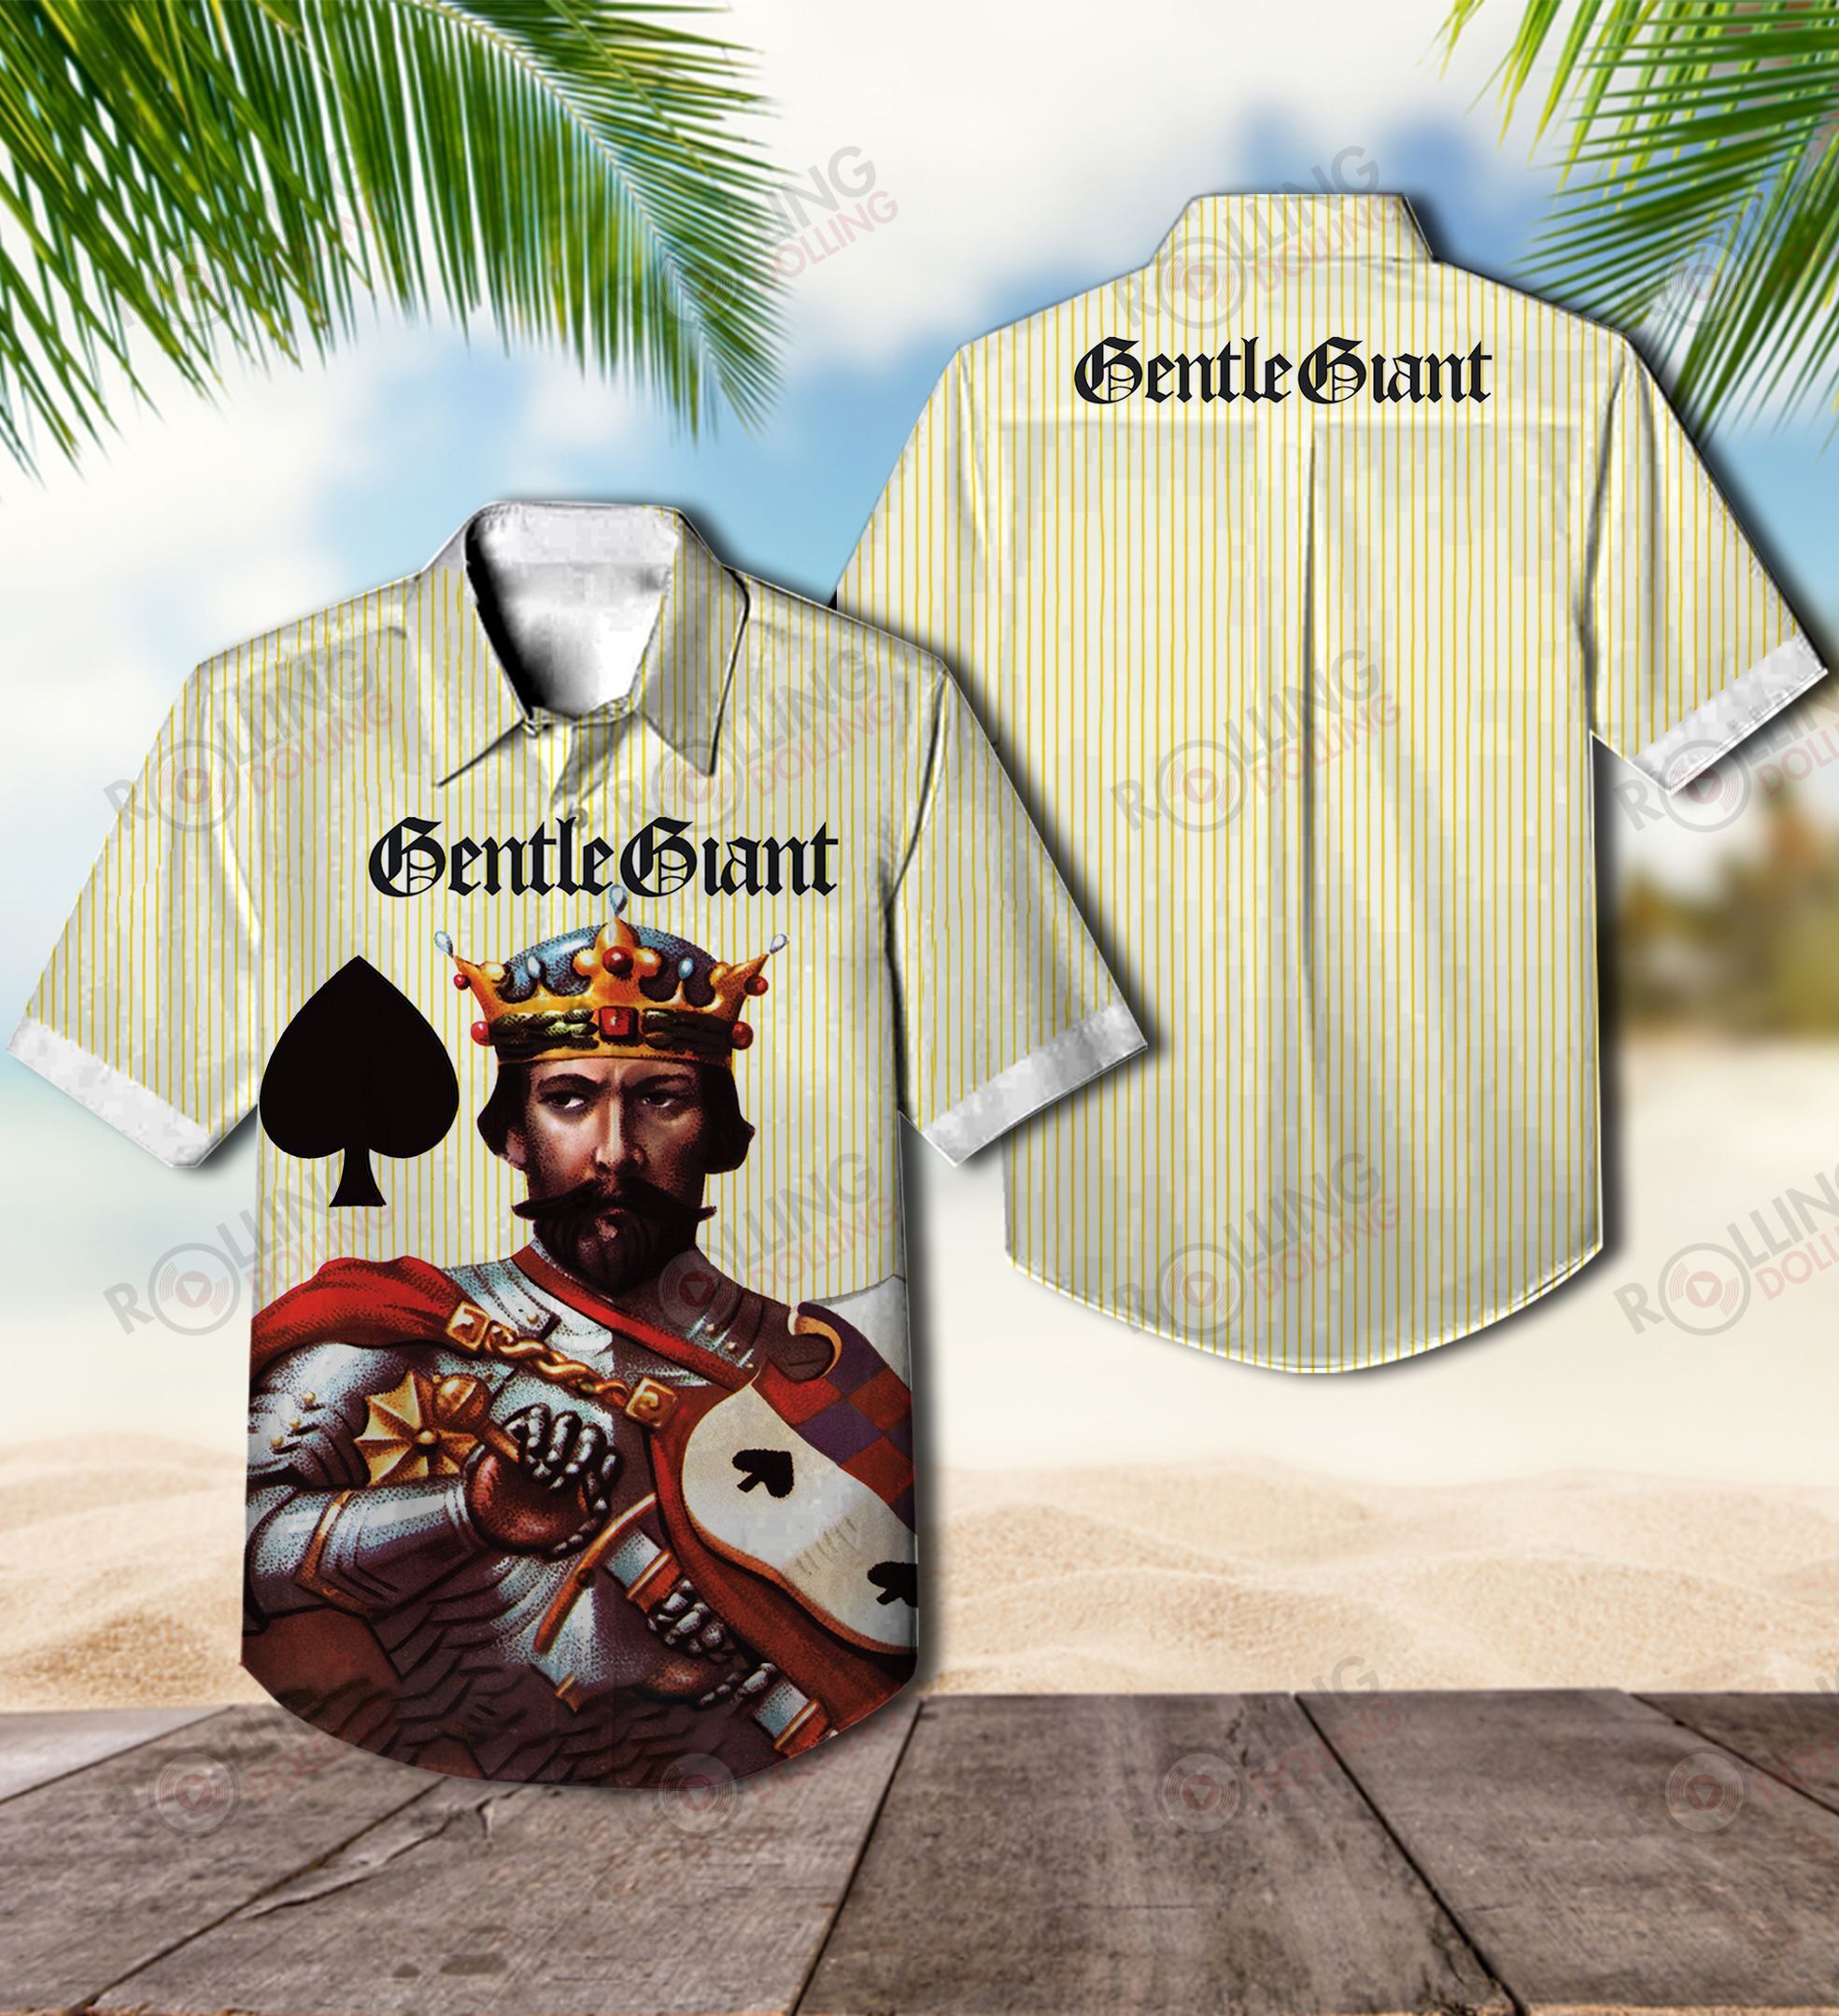 Here Are Some Popular Types Of Hawaiian Shirt For This Summer Vacation Word1